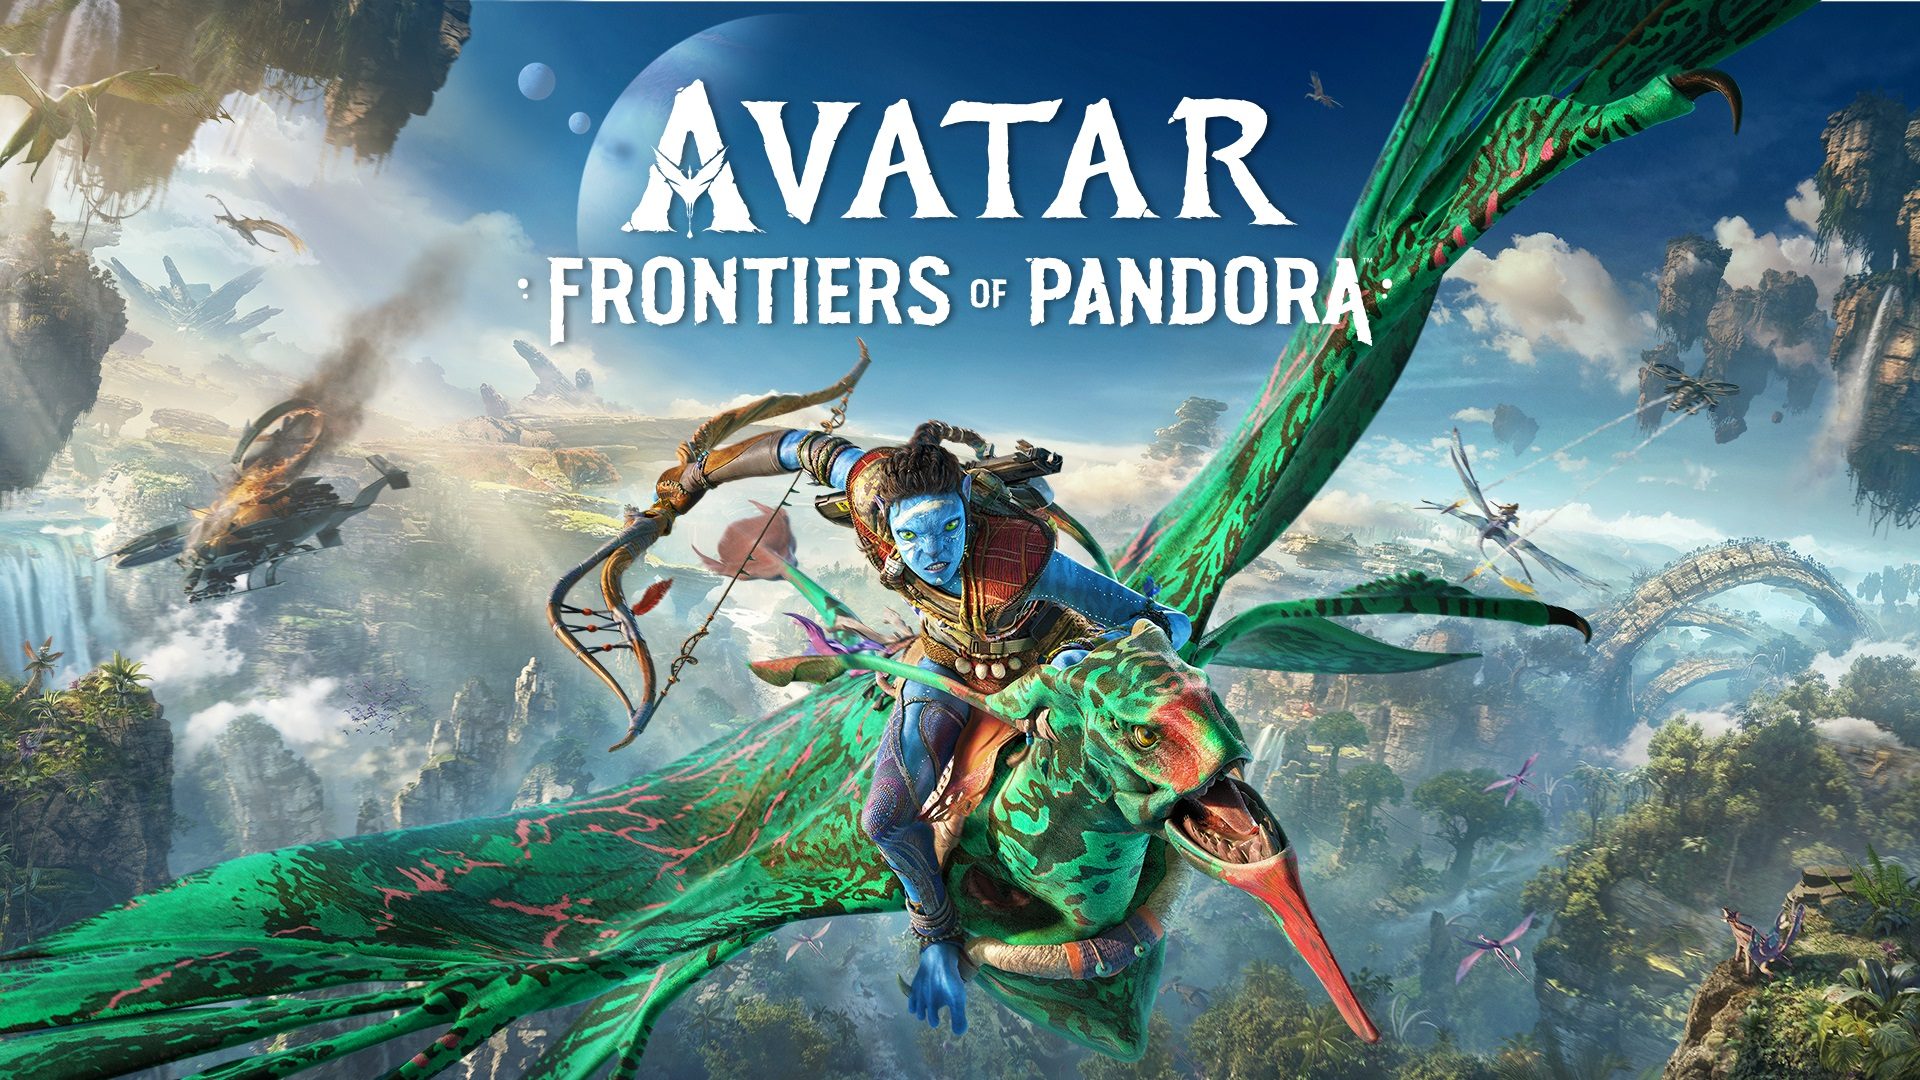 Frontiers of Pandora immerses players in Pandora, launching December 7 – PlayStation.Blog